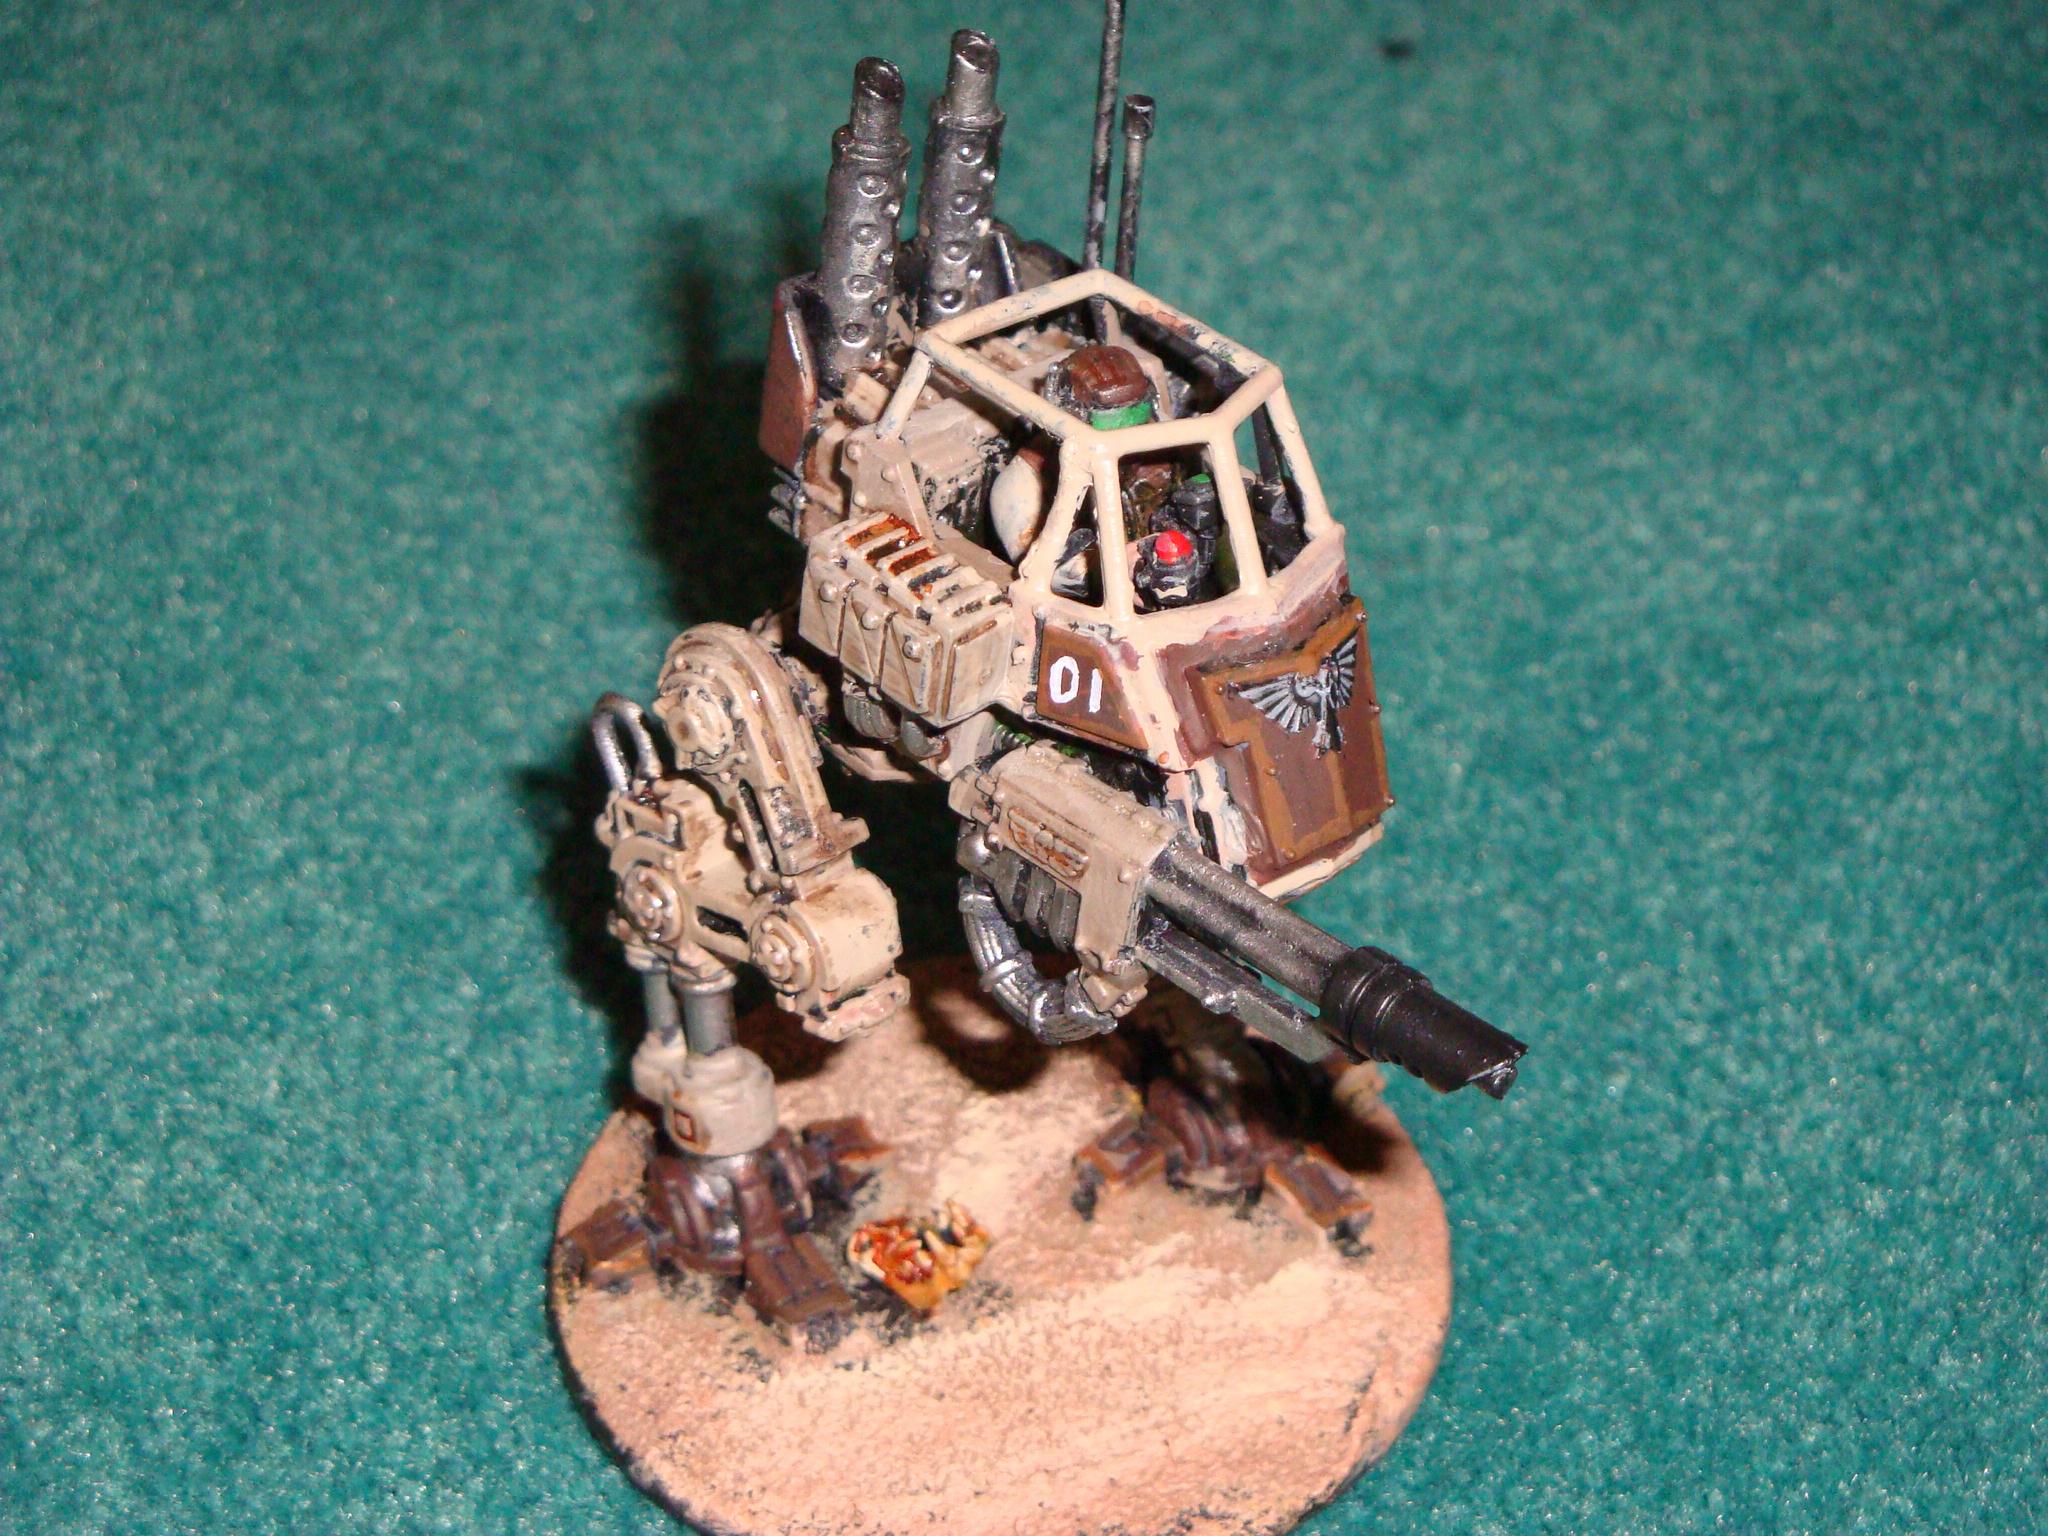 Here is the fully painted sentinel that Vlad X7 asked to see